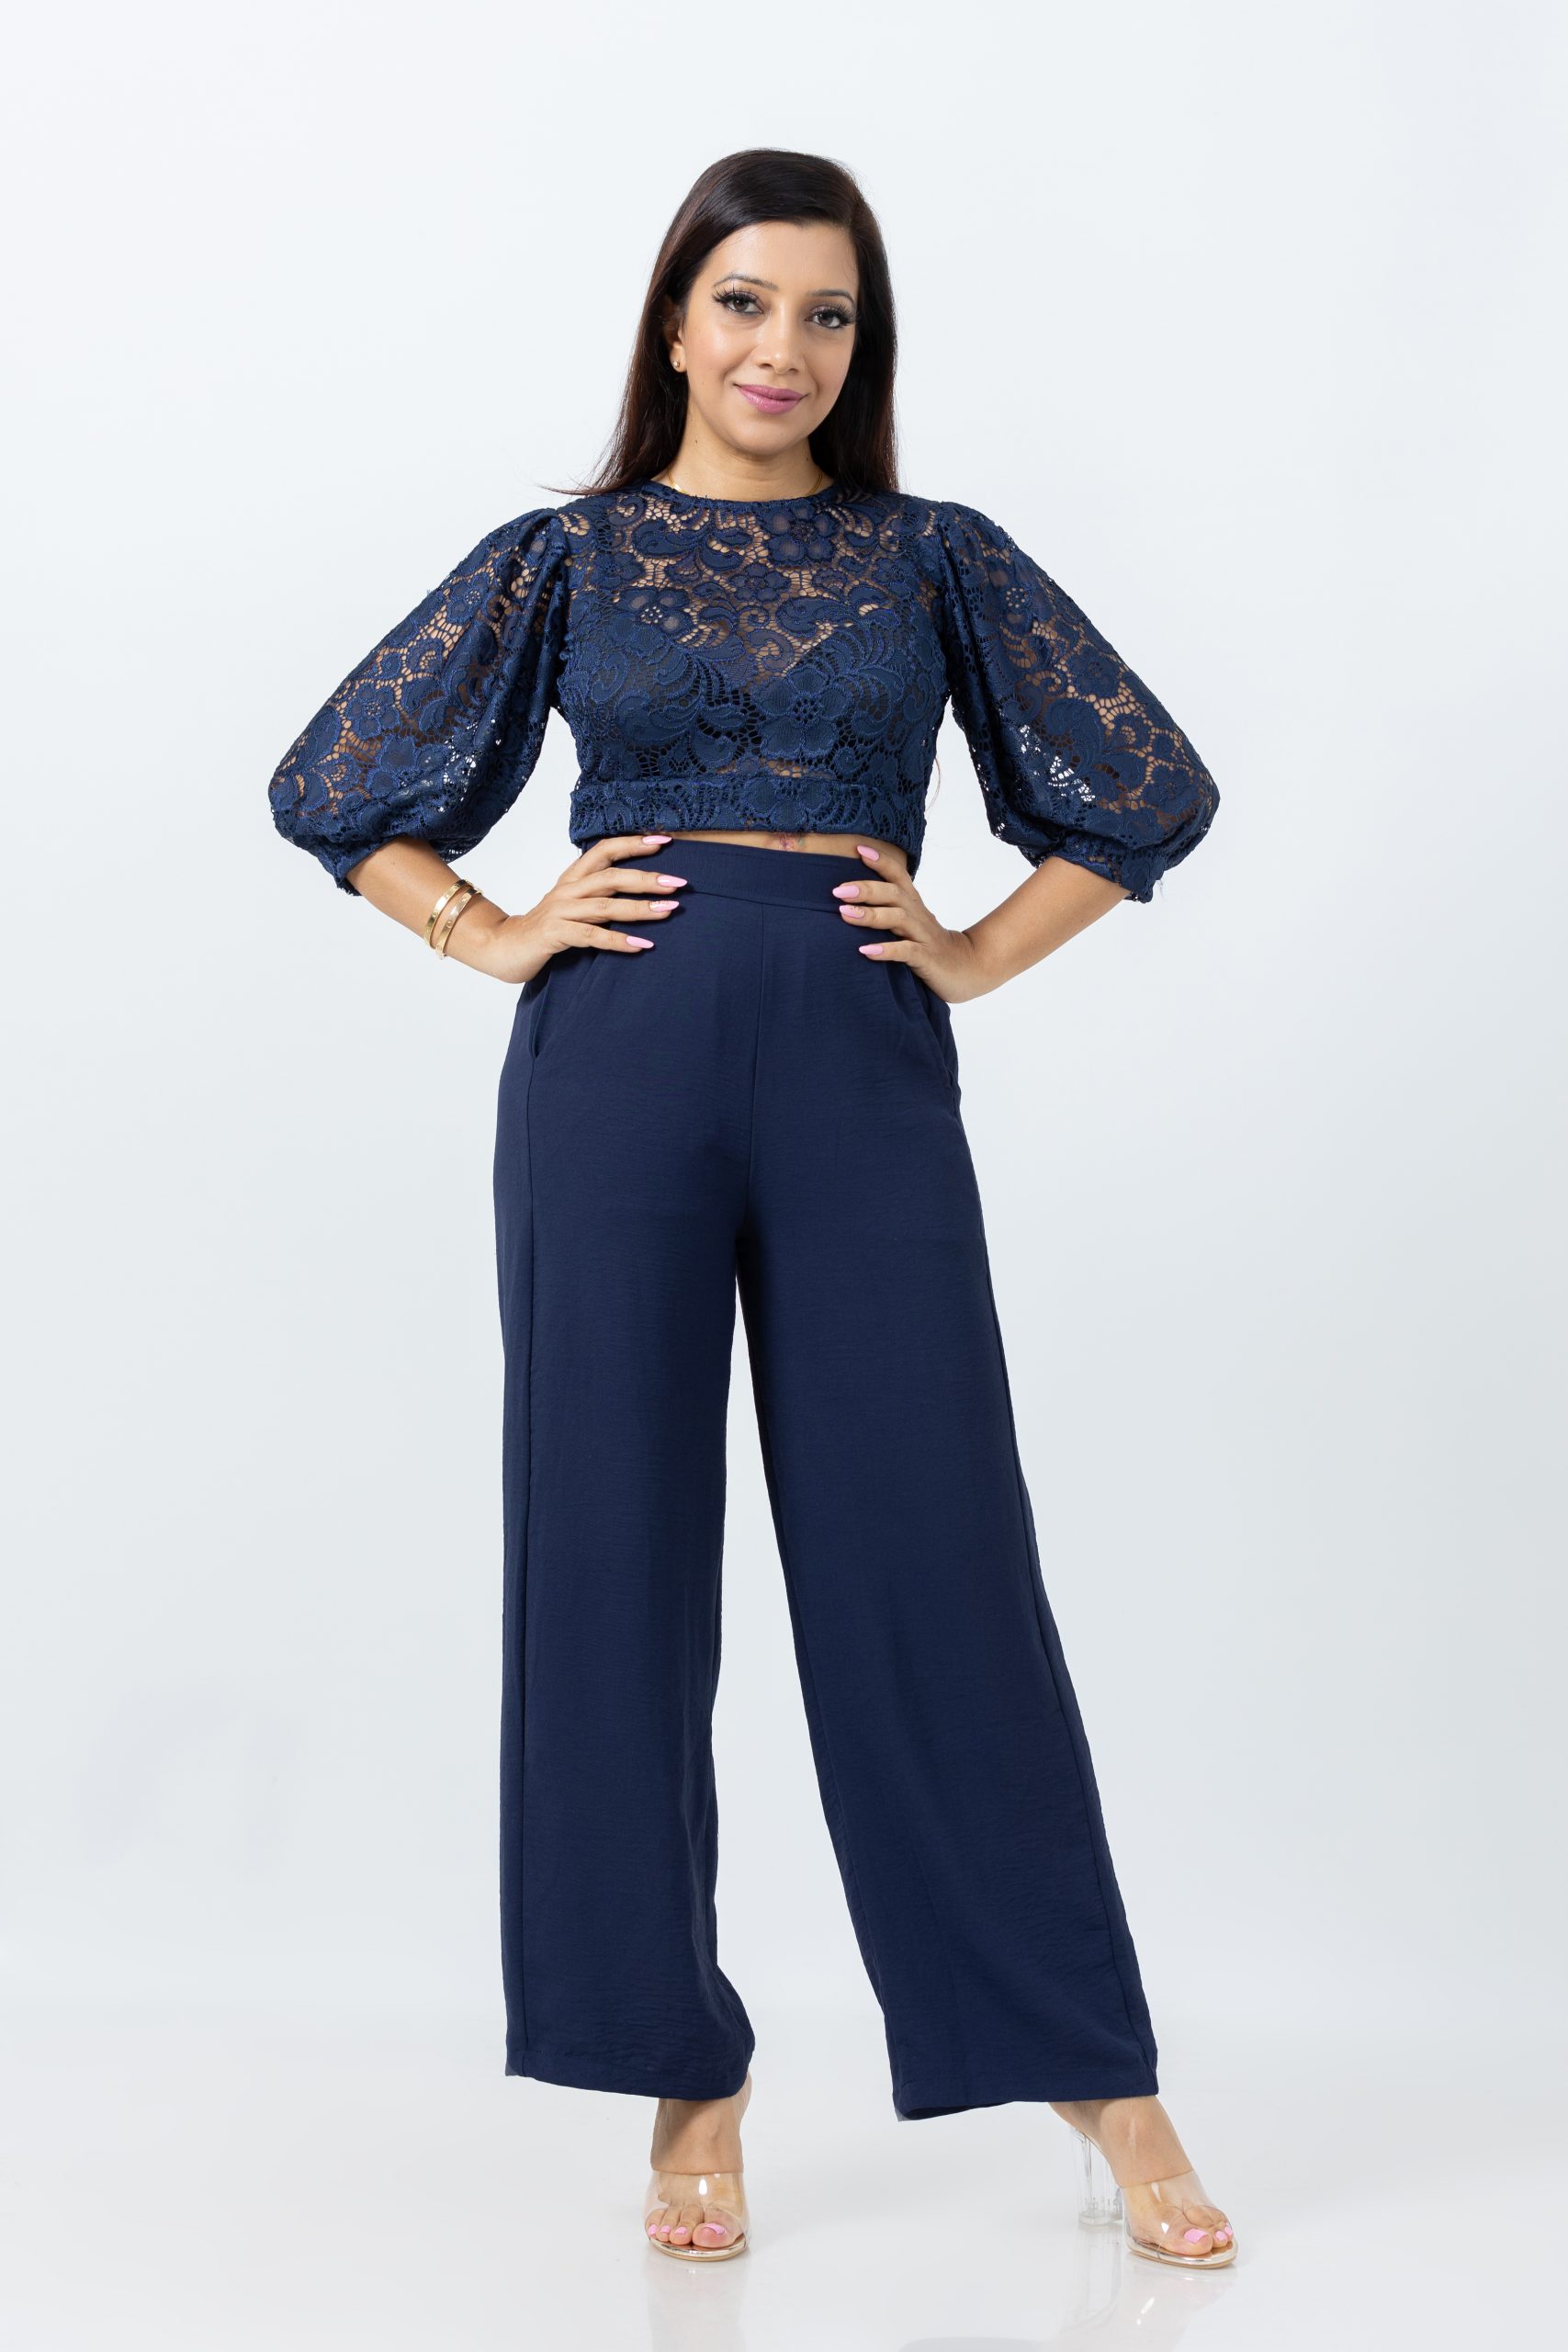 Blue Lace Top with Puff Sleeves - AYOO51 - Ayendra